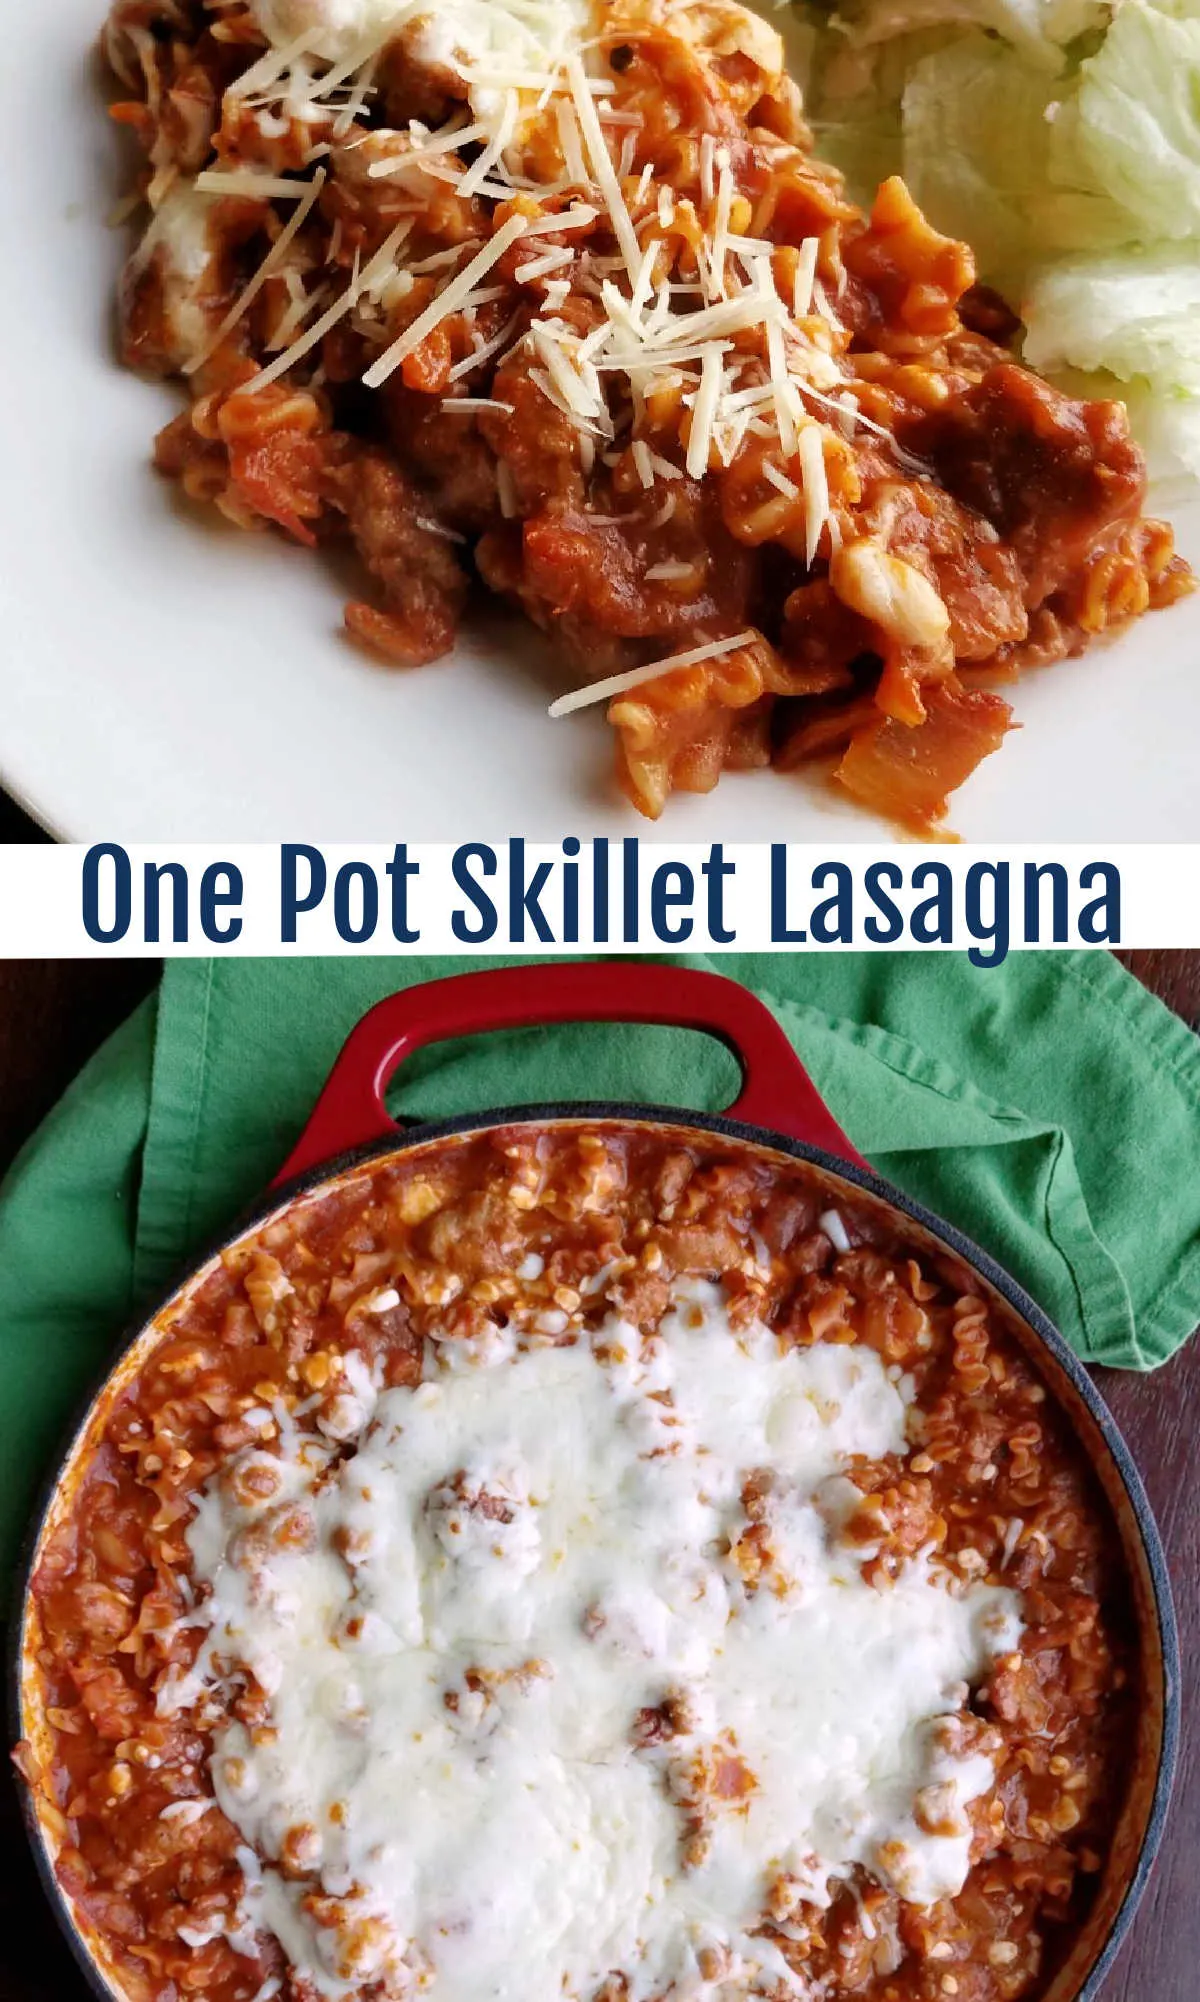 All of the flavors of lasagna cooked in one skillet on the stove. One pot skillet lasagna makes it possible to get it done on a weeknight and without a ton of dishes!